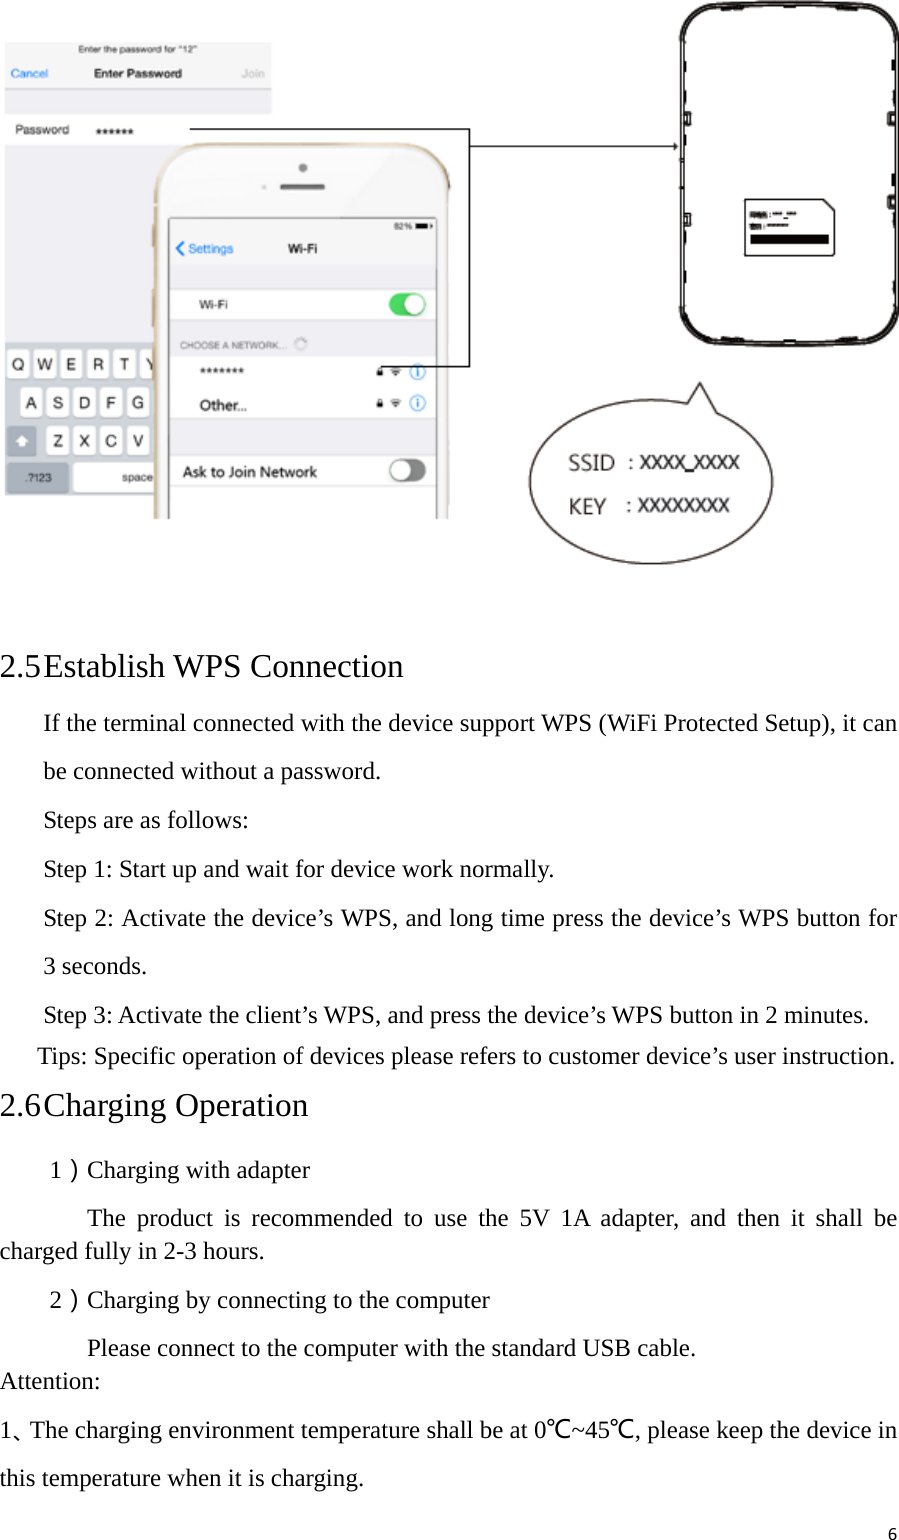 6 2.5 Establish WPS Connection If the terminal connected with the device support WPS (WiFi Protected Setup), it can be connected without a password. Steps are as follows: Step 1: Start up and wait for device work normally. Step 2: Activate the device’s WPS, and long time press the device’s WPS button for 3 seconds. Step 3: Activate the client’s WPS, and press the device’s WPS button in 2 minutes.       Tips: Specific operation of devices please refers to customer device’s user instruction. 2.6 Charging Operation     1）Charging with adapter        The product is recommended to use the 5V 1A adapter, and then it shall be charged fully in 2-3 hours.     2）Charging by connecting to the computer        Please connect to the computer with the standard USB cable. Attention: 1、The charging environment temperature shall be at 0℃~45℃, please keep the device in this temperature when it is charging. 